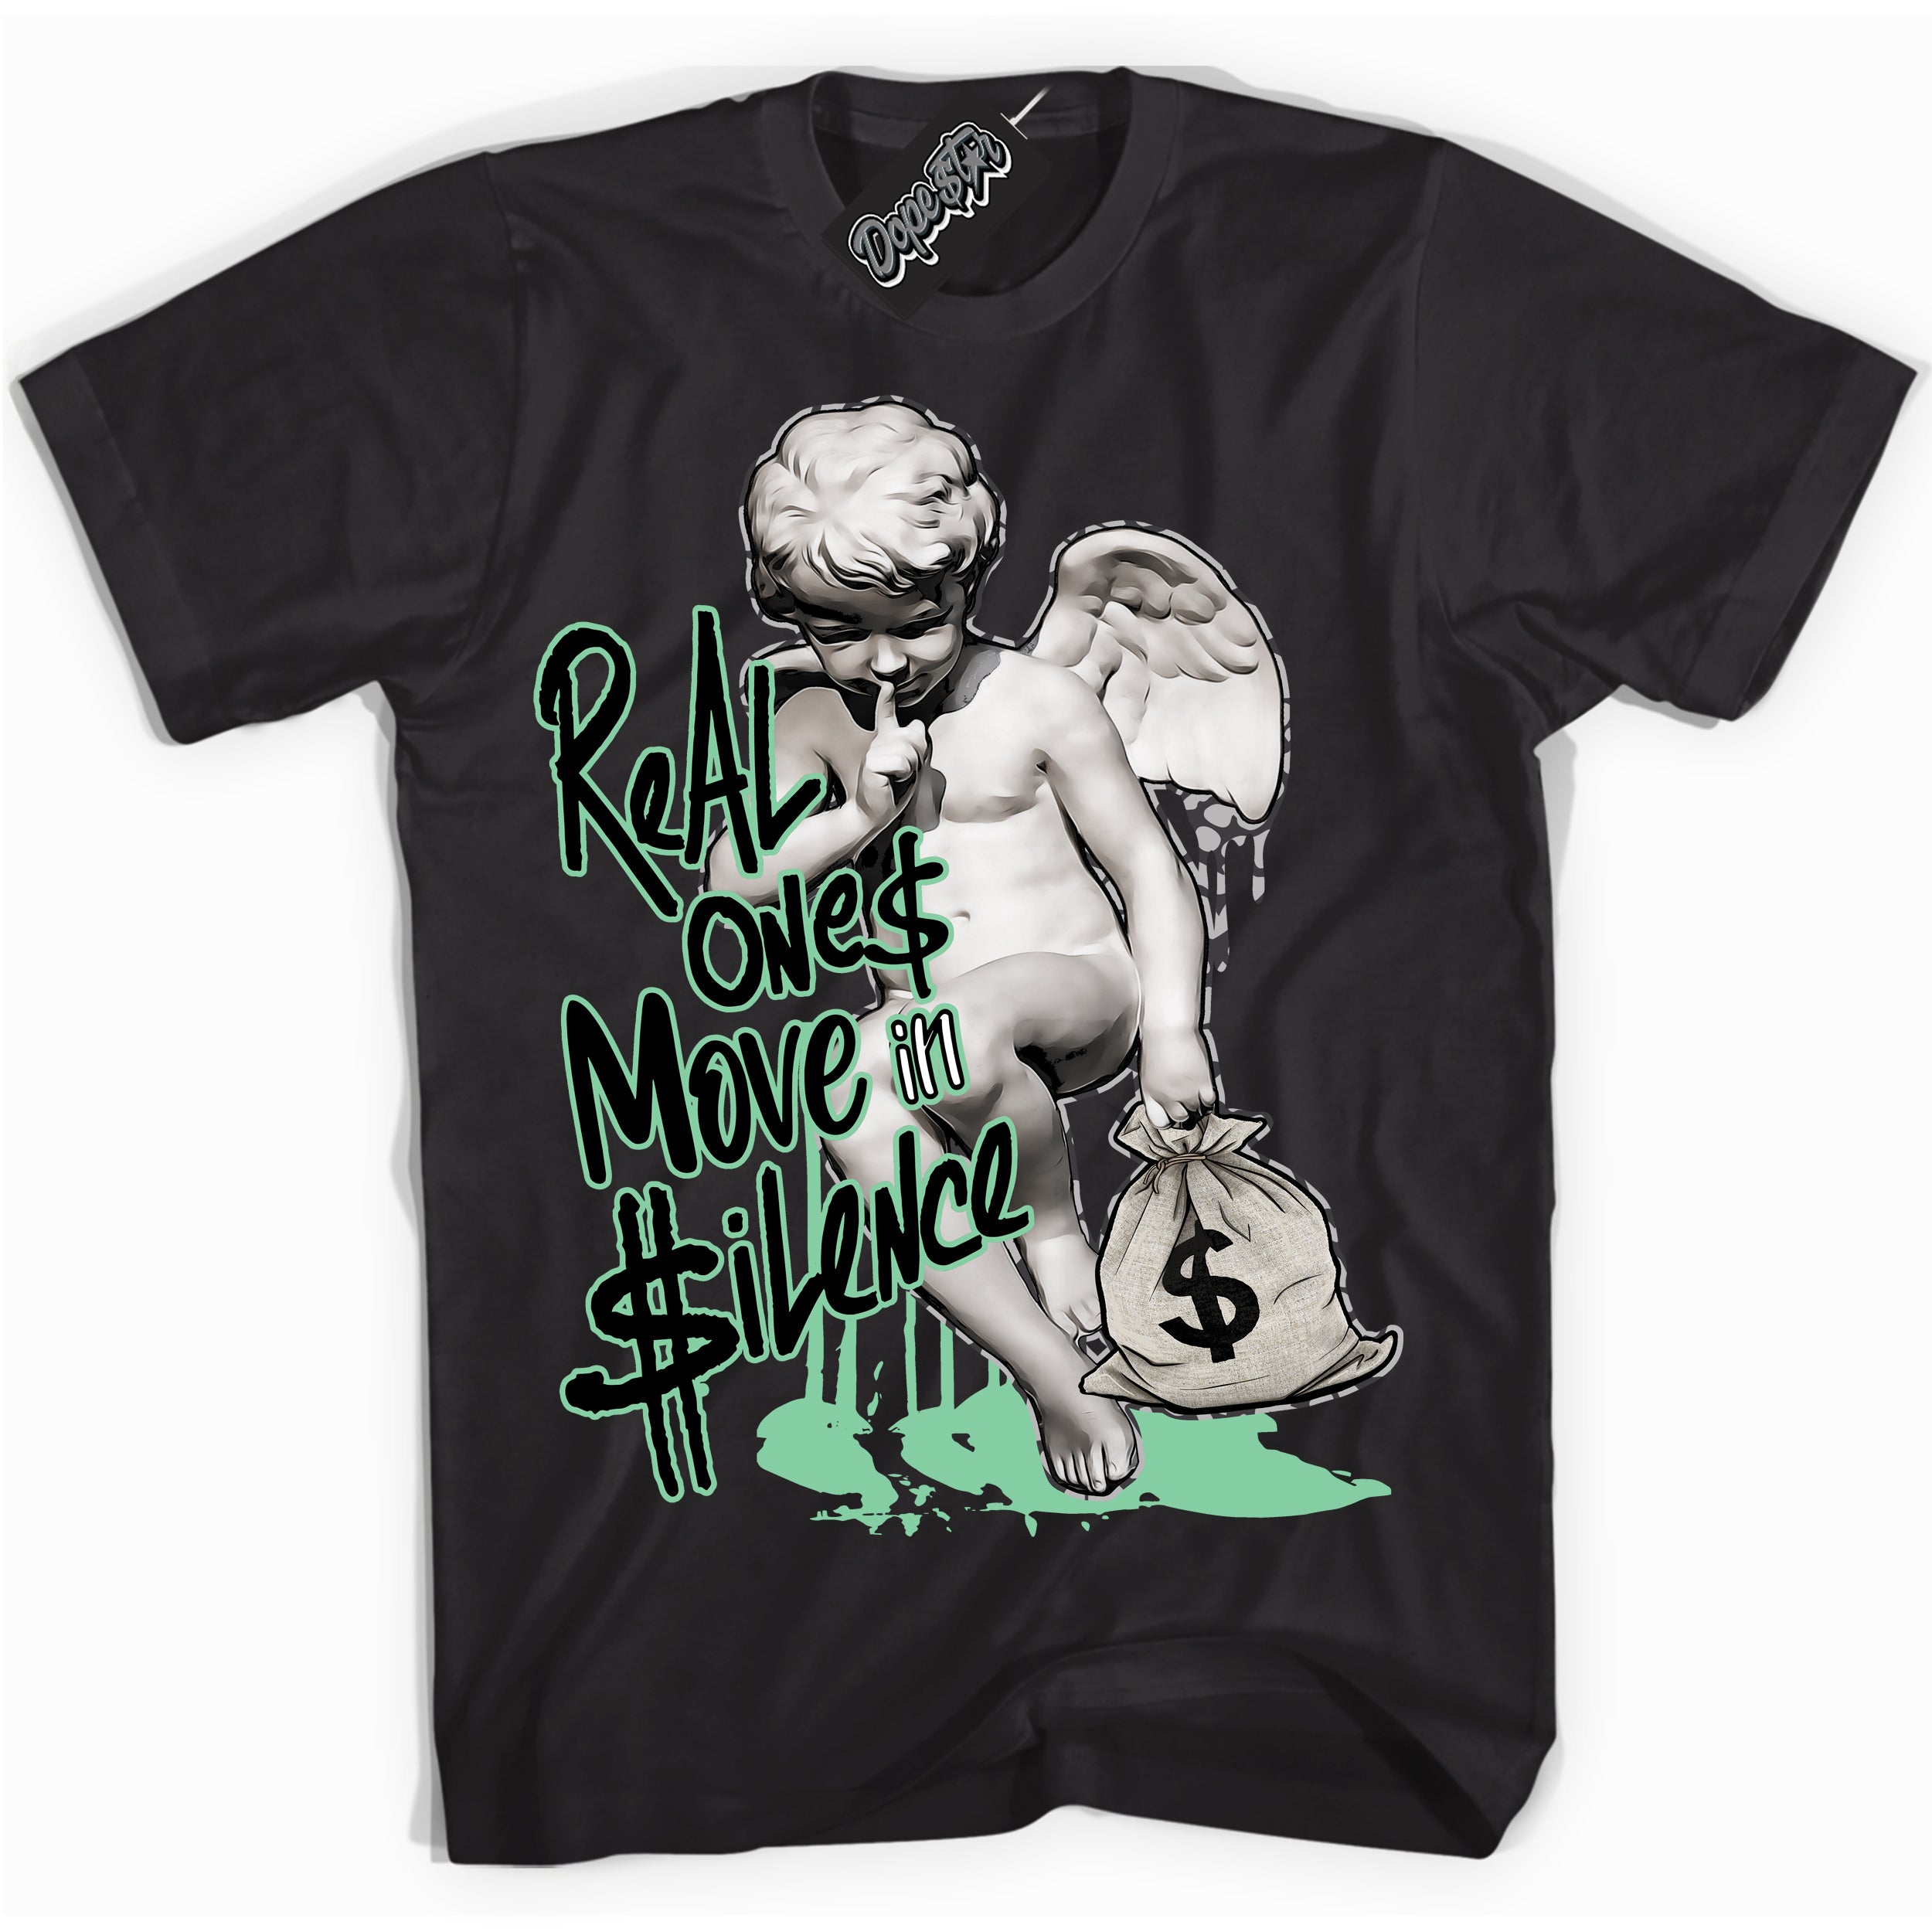 Cool Black graphic tee with “ Real Ones Cherub ” design, that perfectly matches Green Glow 3s sneakers 